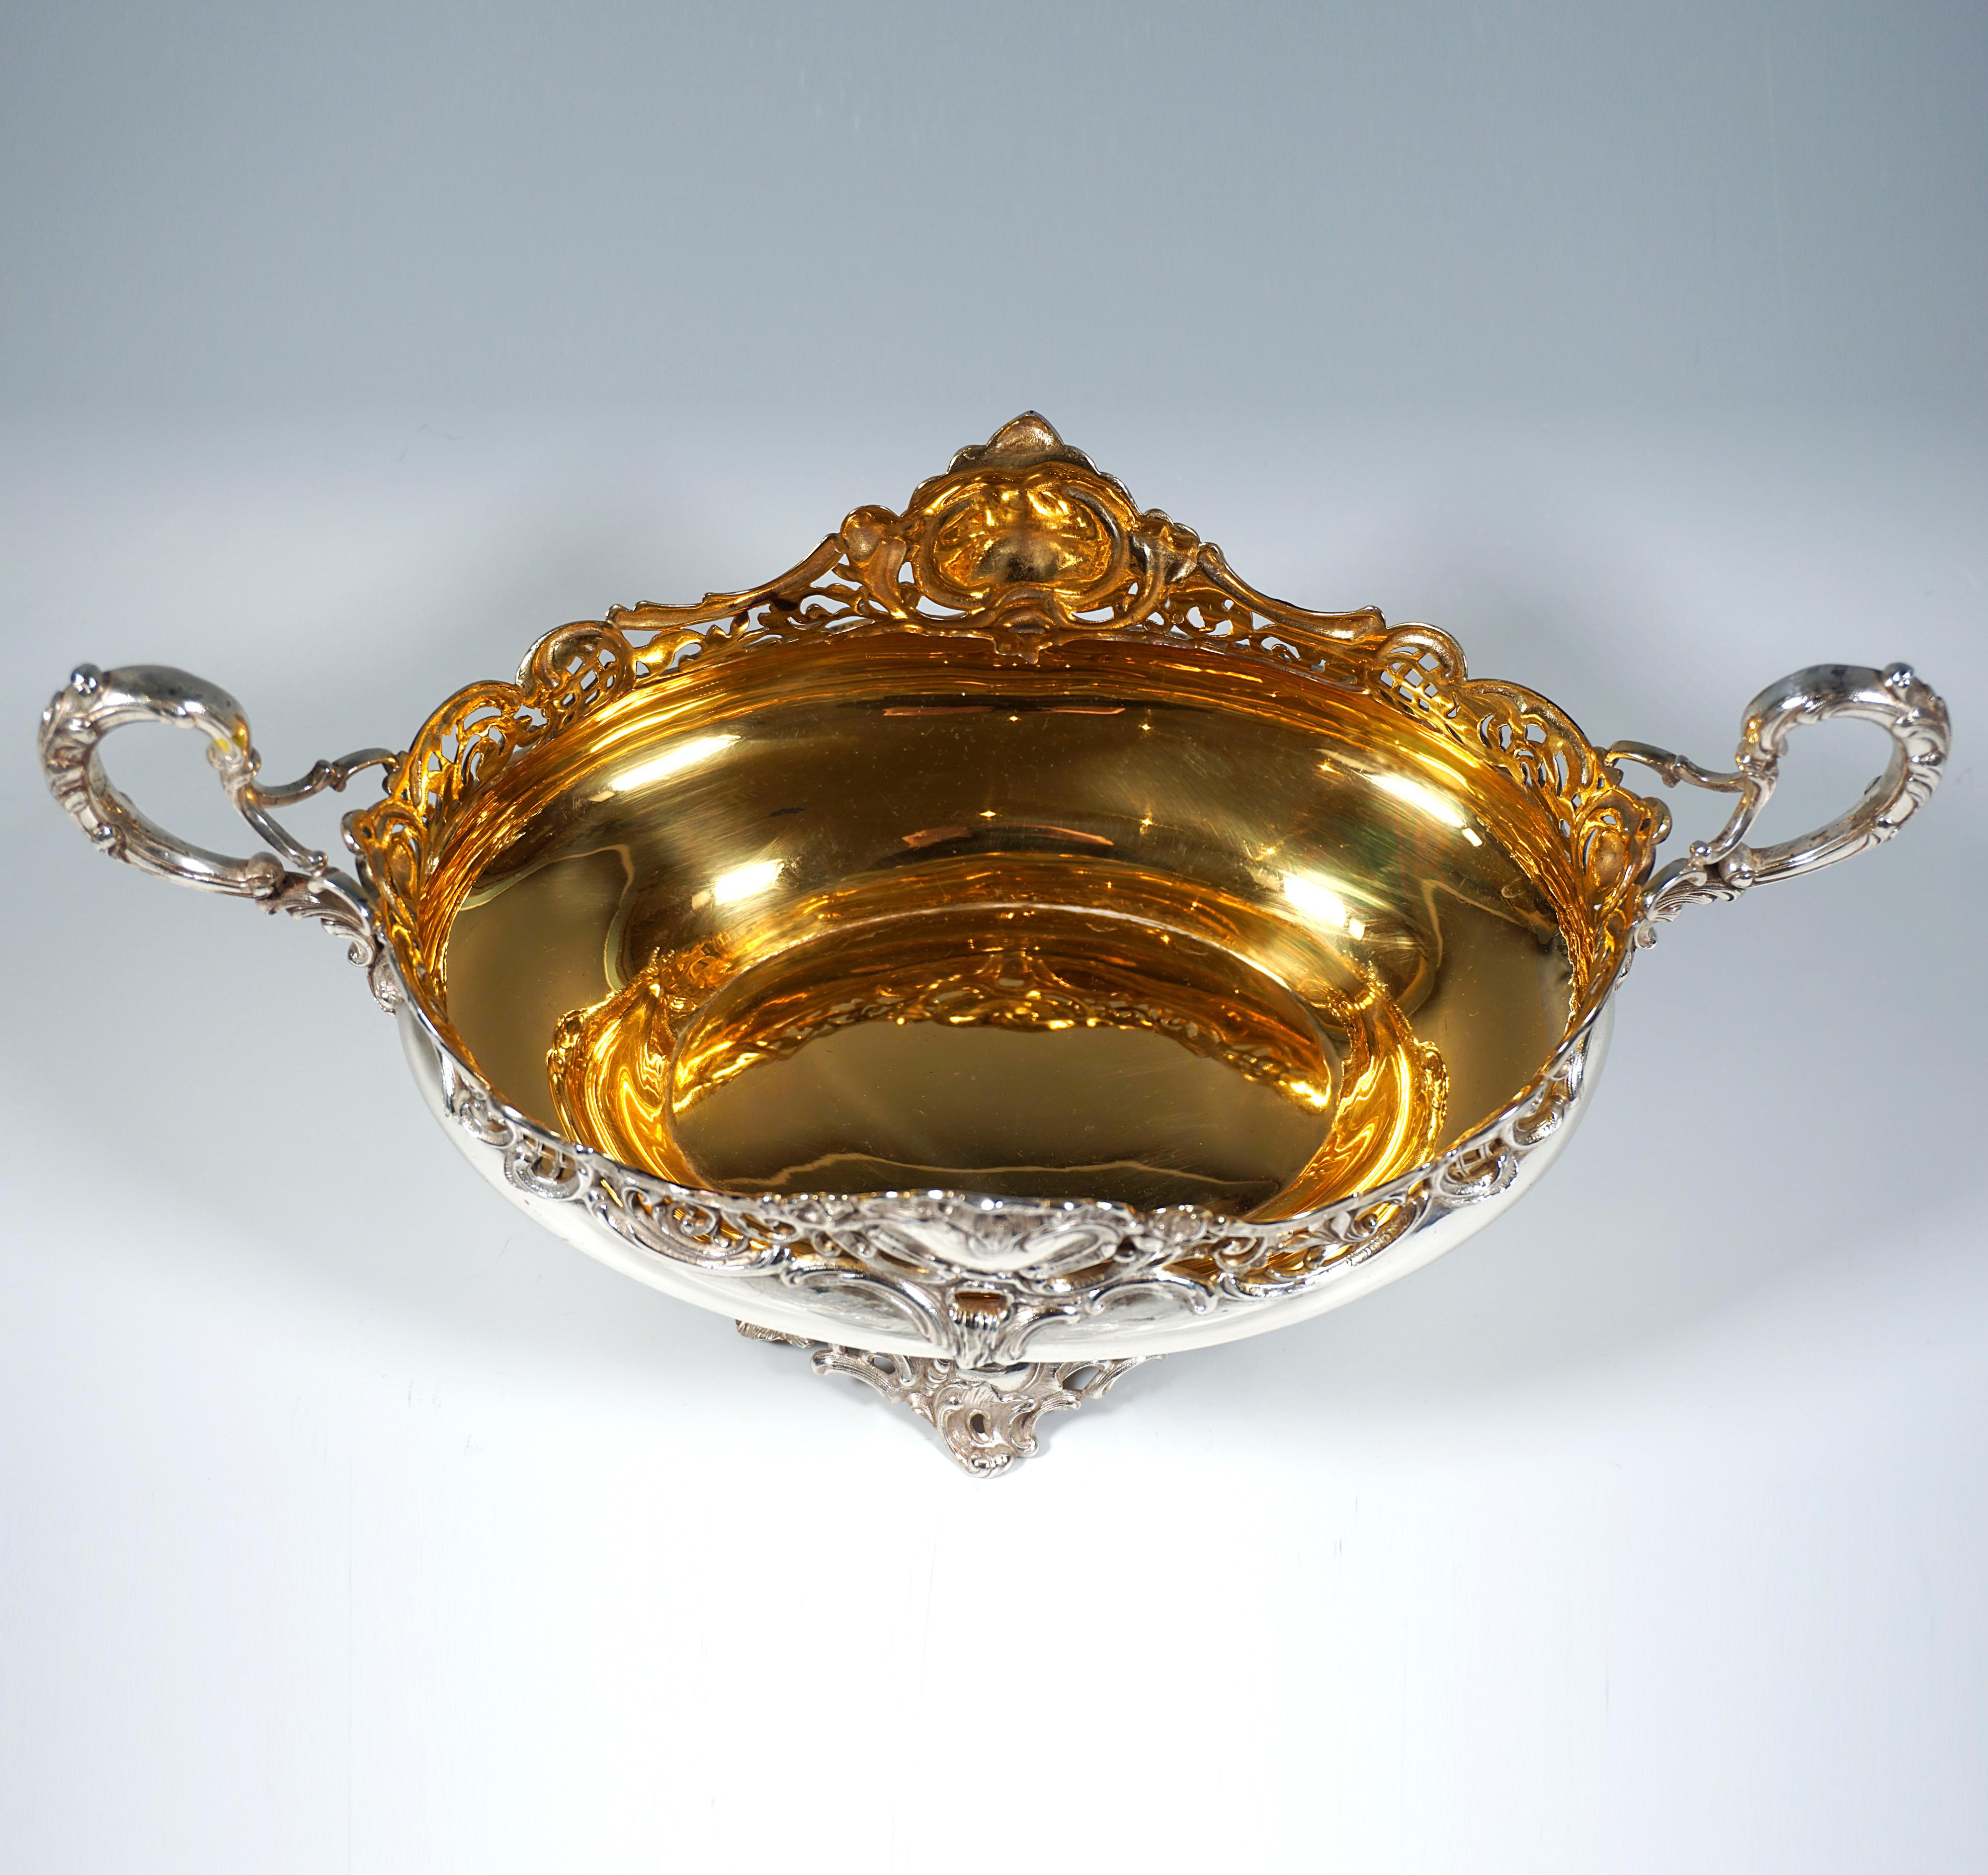 Hand-Crafted Silver Jardiniere With Artfully Cut Glass Insert, Wilkens & Sons Germany, 1894 For Sale